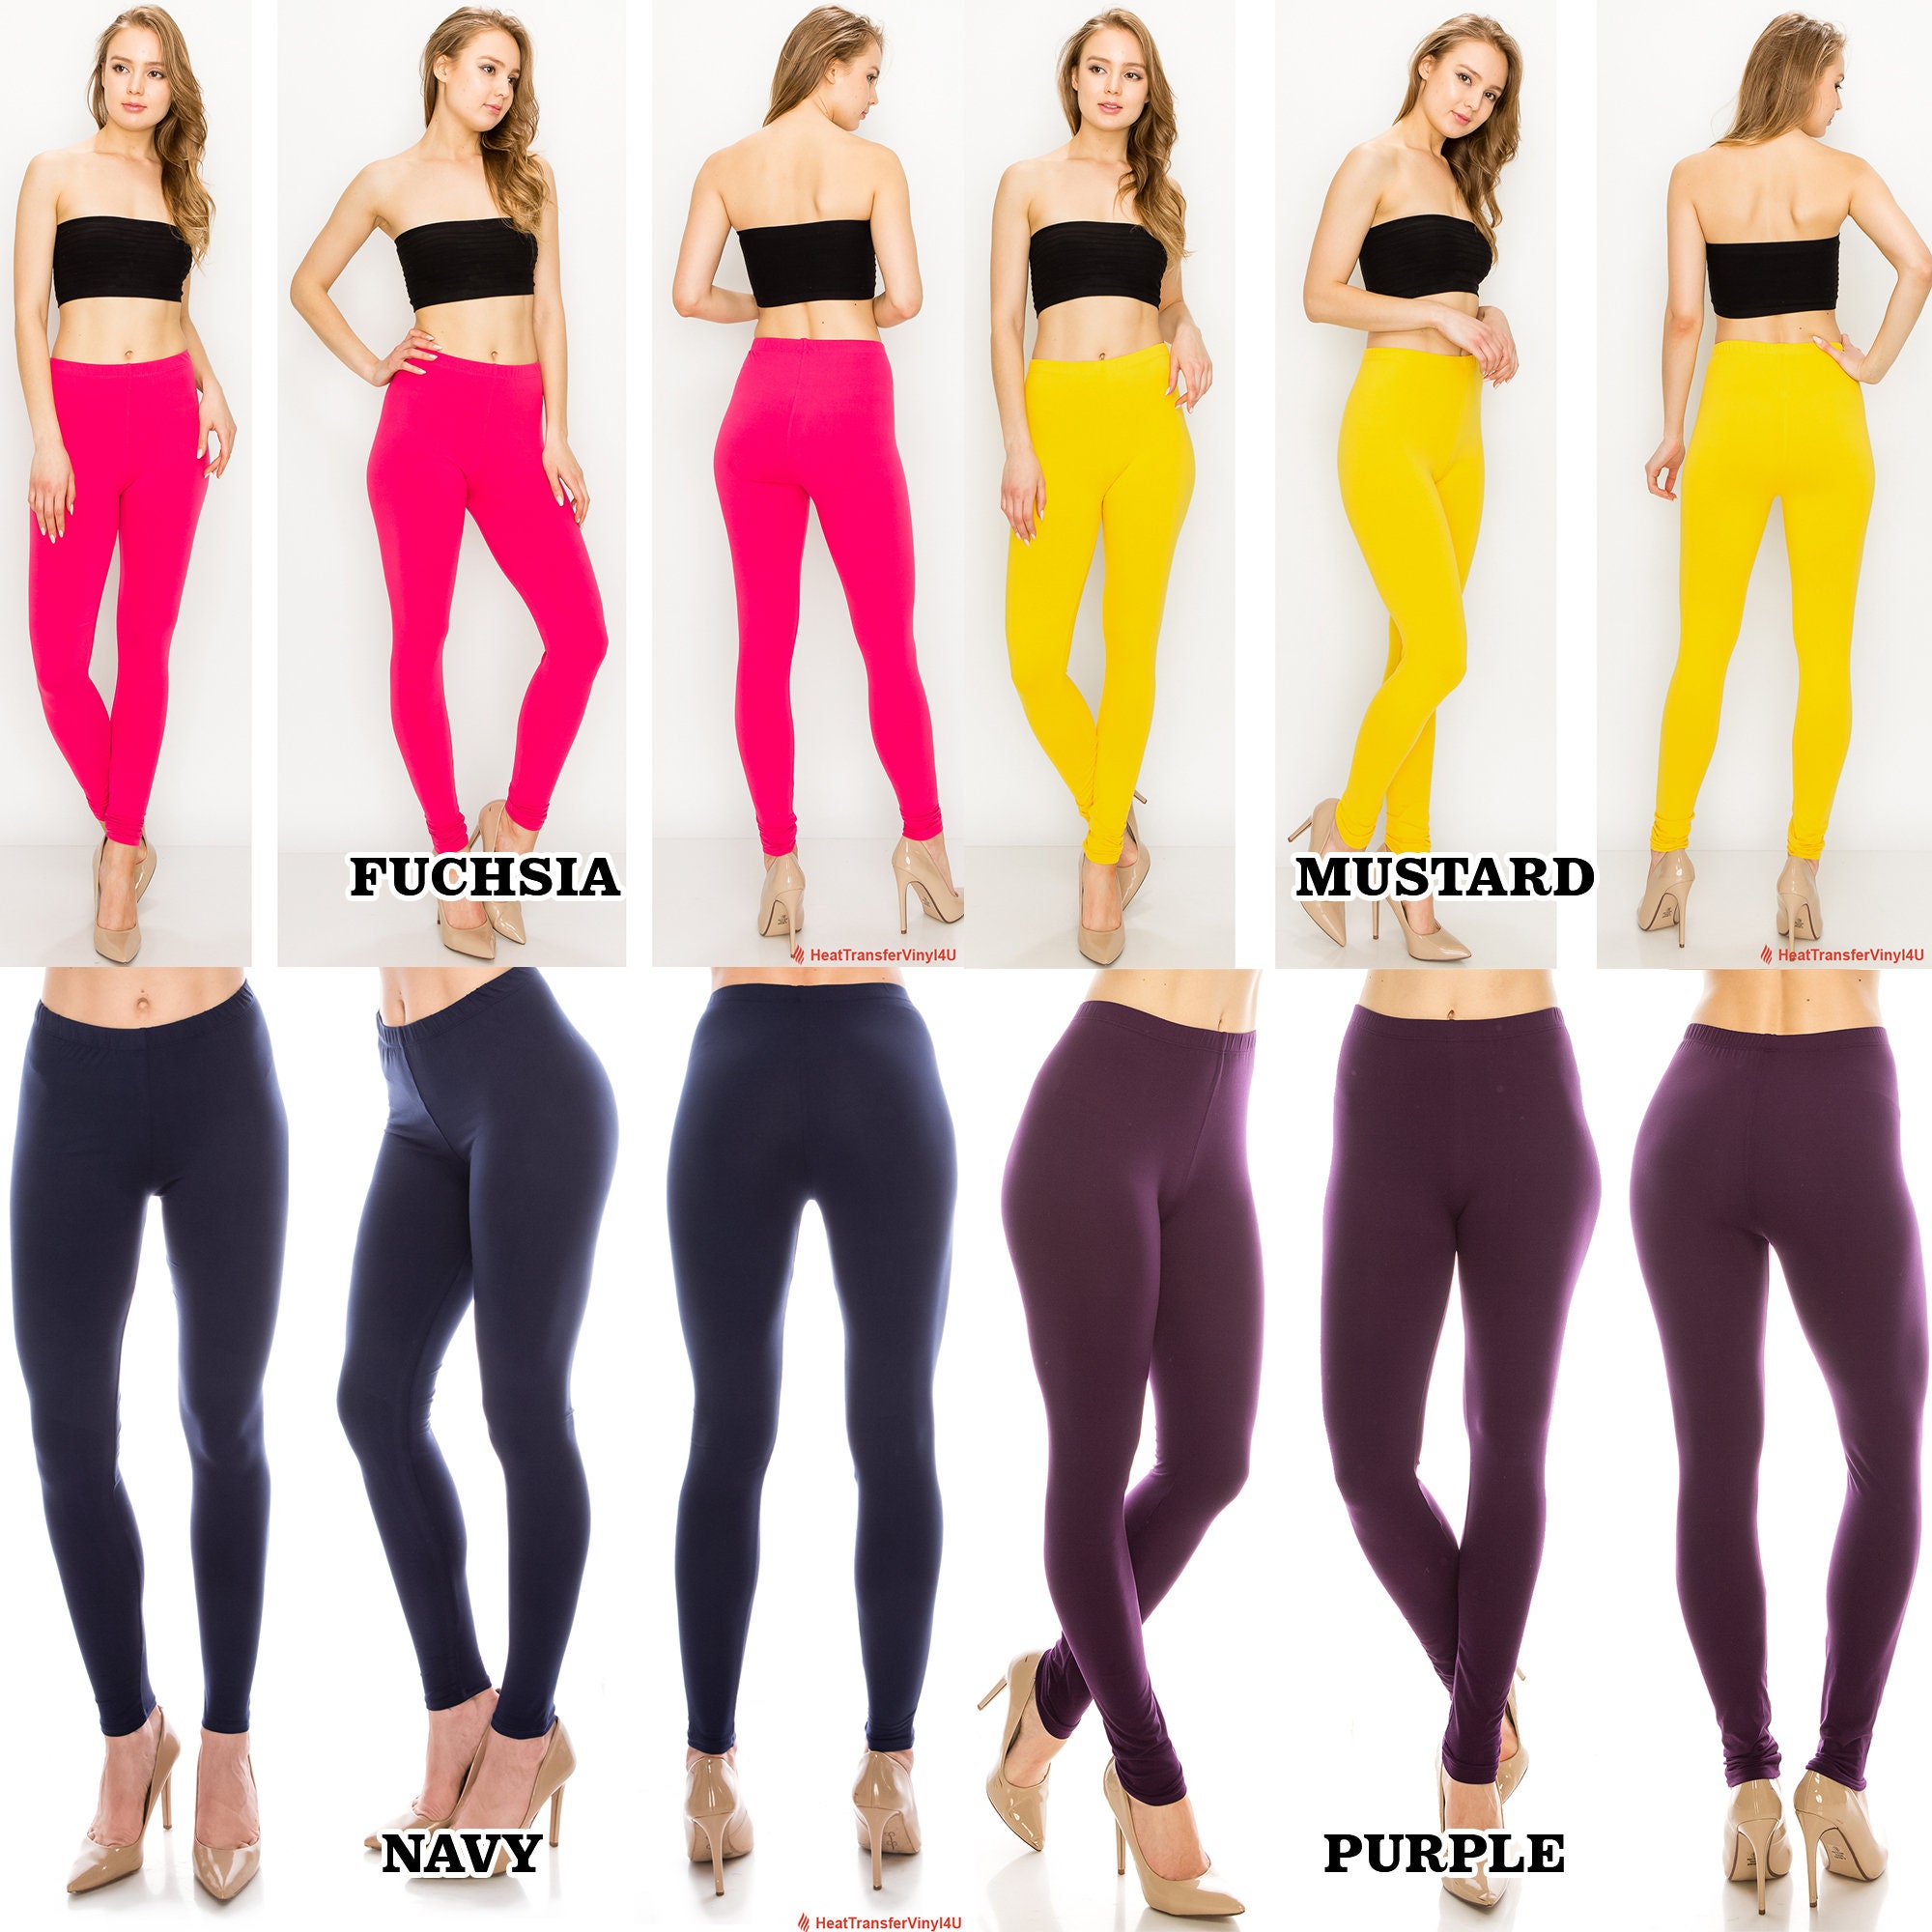 Women's Ultra Butter Soft Leggings in Solid Colors one Size and Plus Size  FREE SHIPPING 